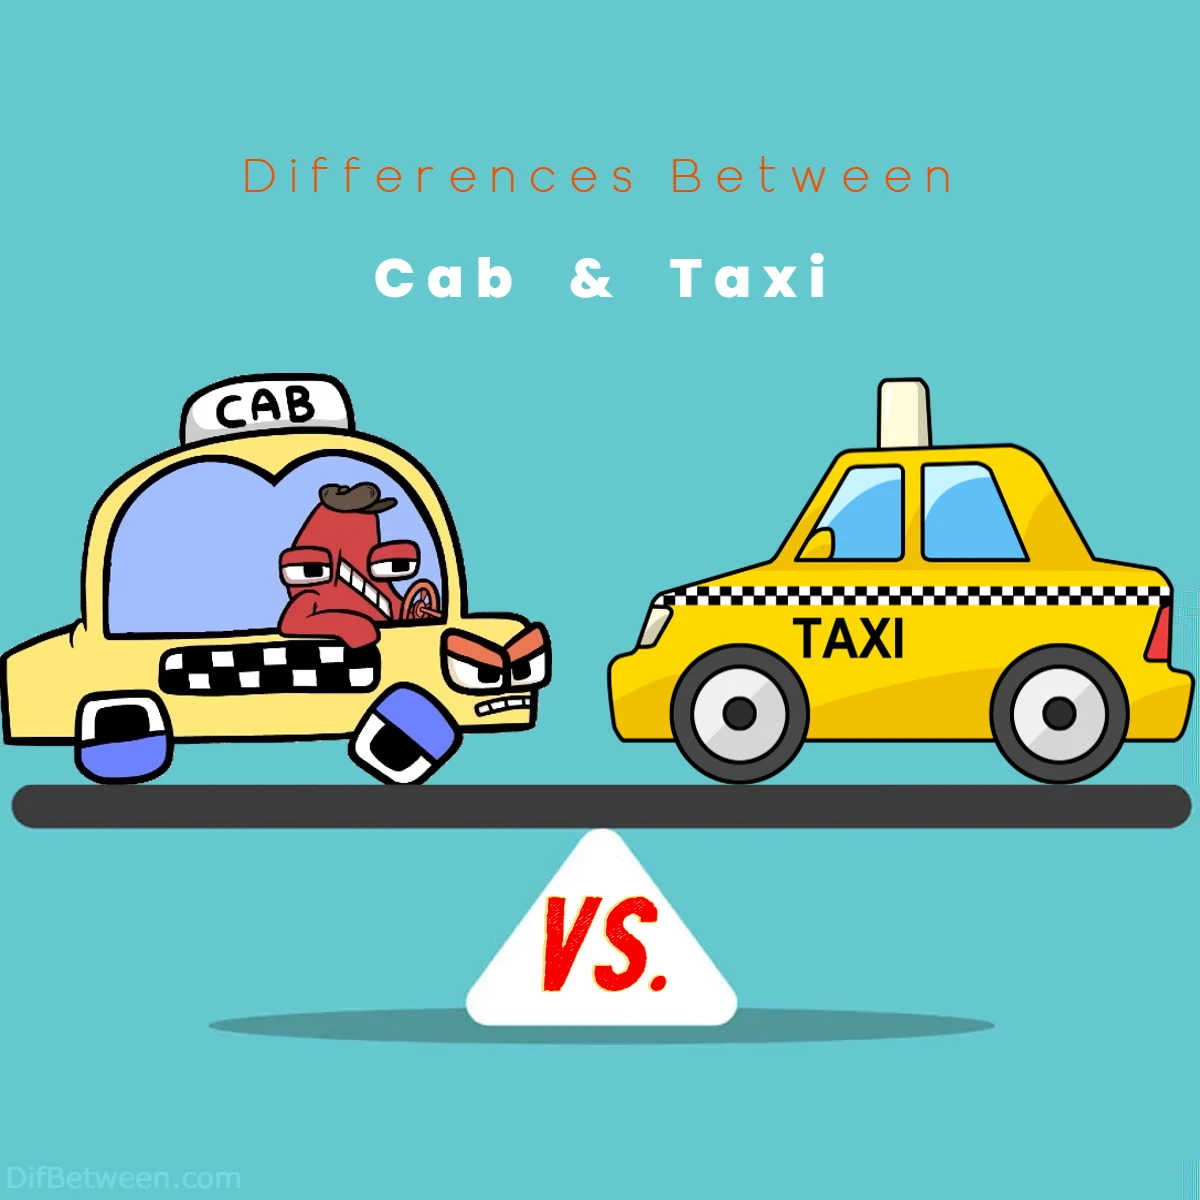 Differences Between Cab vs Taxi